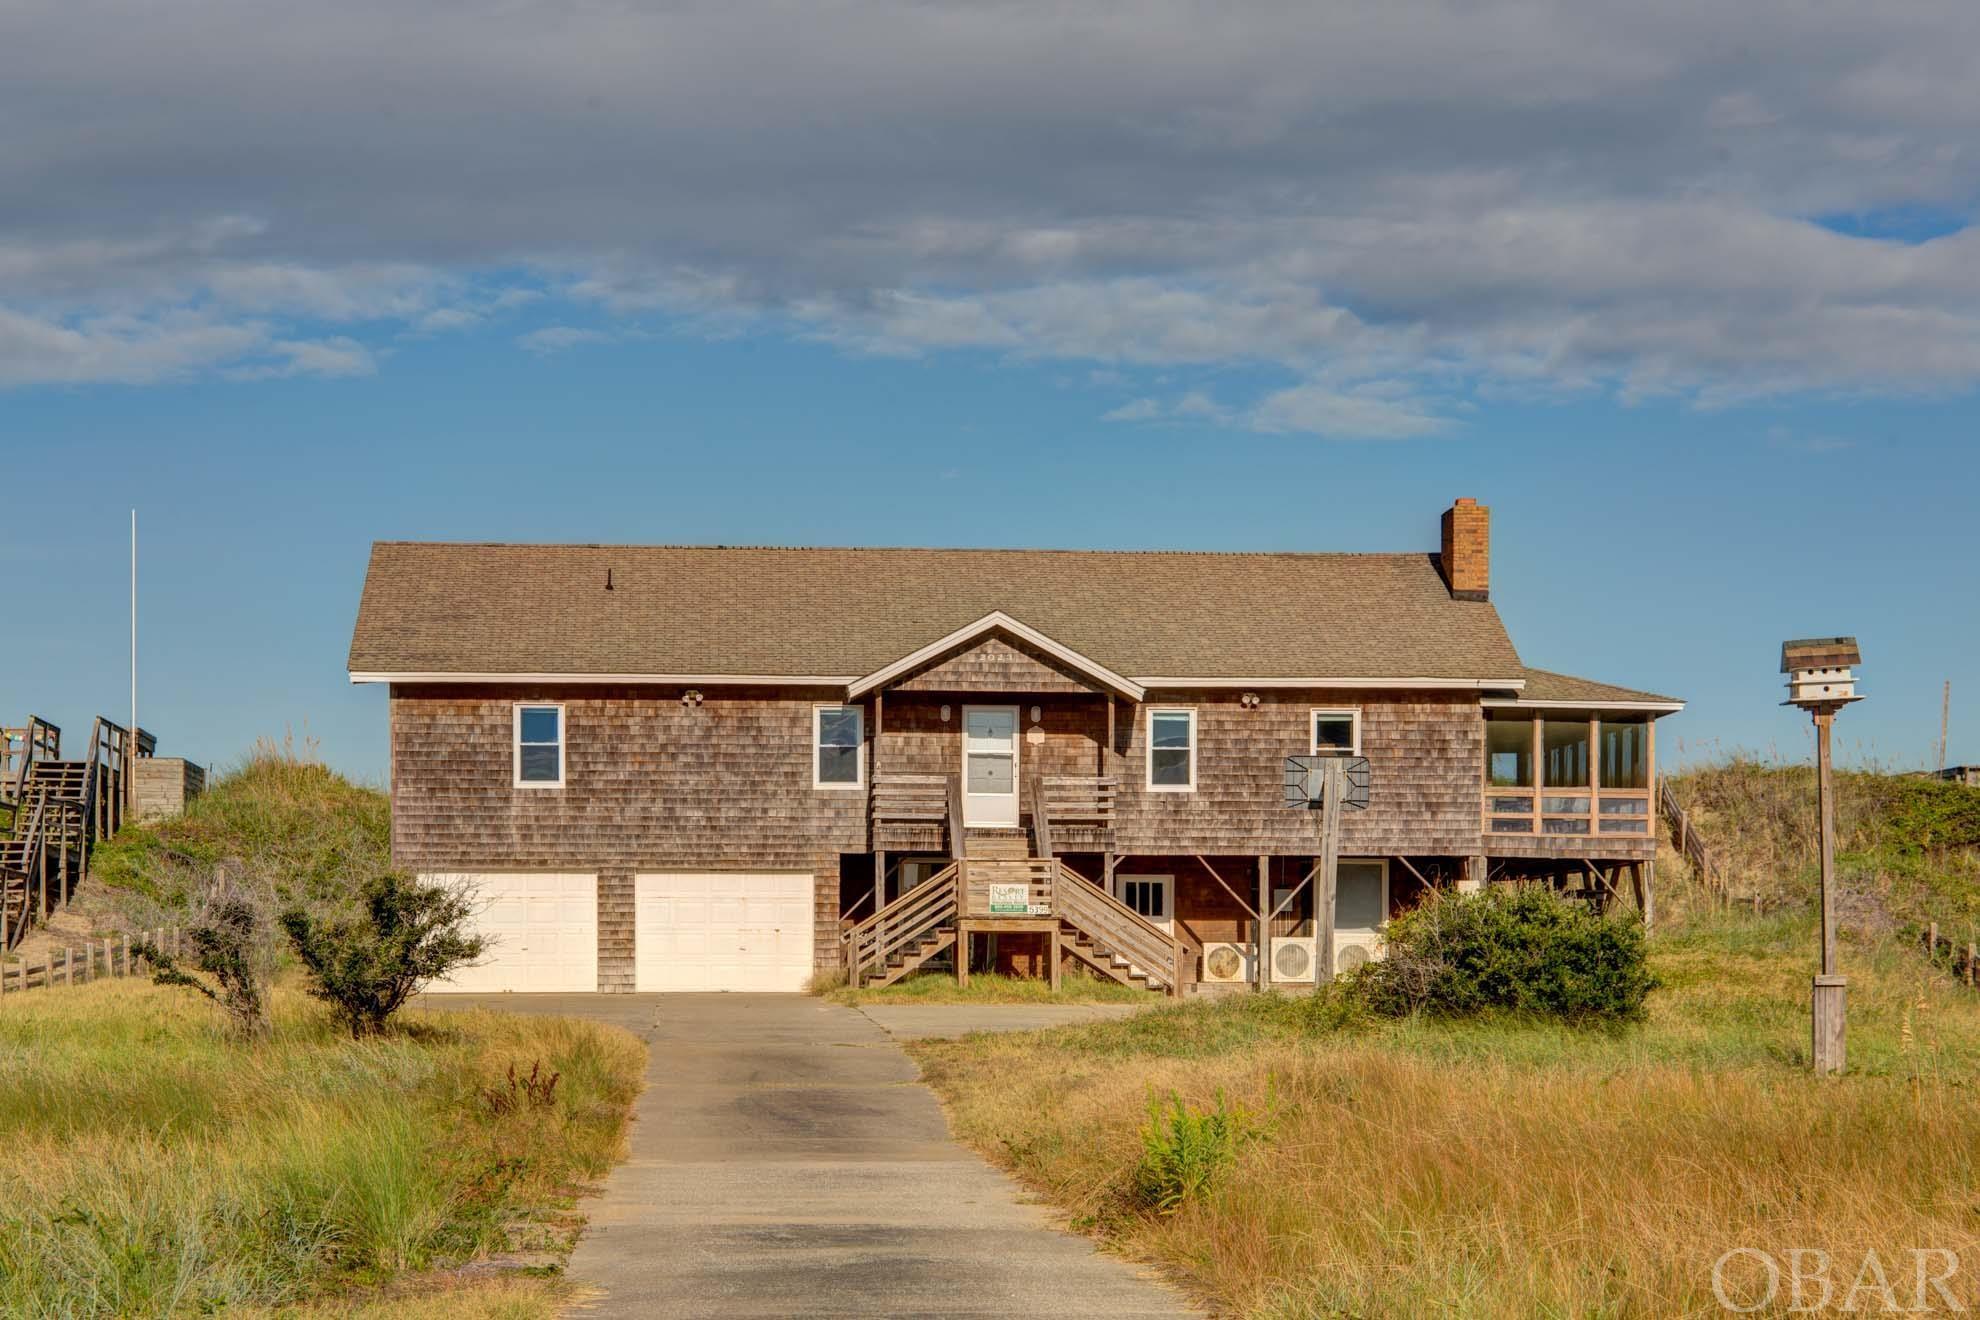 This vintage oceanfront cottage tucked into the dunes provides a rare opportunity to own nearly an acre of oceanfront land on a 100-foot wide lot. The value of this property is in the land and the development potential. Subdivide into two oceanfront parcels, tap into the sewer system (KDHWWTP) to develop a cottage court or larger home, or restore the classic OBX cottage for the enjoyment of generations to come. This property is conveniently located near the Nags Head & Kill Devil Hills town line and is within walking distance of local restaurants, breweries, and groceries.    Built-in 1970, the cottage has 4 spacious bedrooms - 2 bedrooms with ocean views, and 2.5 bathrooms. Tall cathedral ceilings and an approximately 500 square feet screened-in porch with ocean views add to the charm and character of this classic beach cottage.  The healthy dune system adds privacy and ambiance to the oceanfront decks and beach access. The property has an X flood zone west of the dune and a VE flood zone on the oceanside of the property.   This home was used as a second family home for decades and has recently been on the vacation rental market with a conservative rental history of $50k.